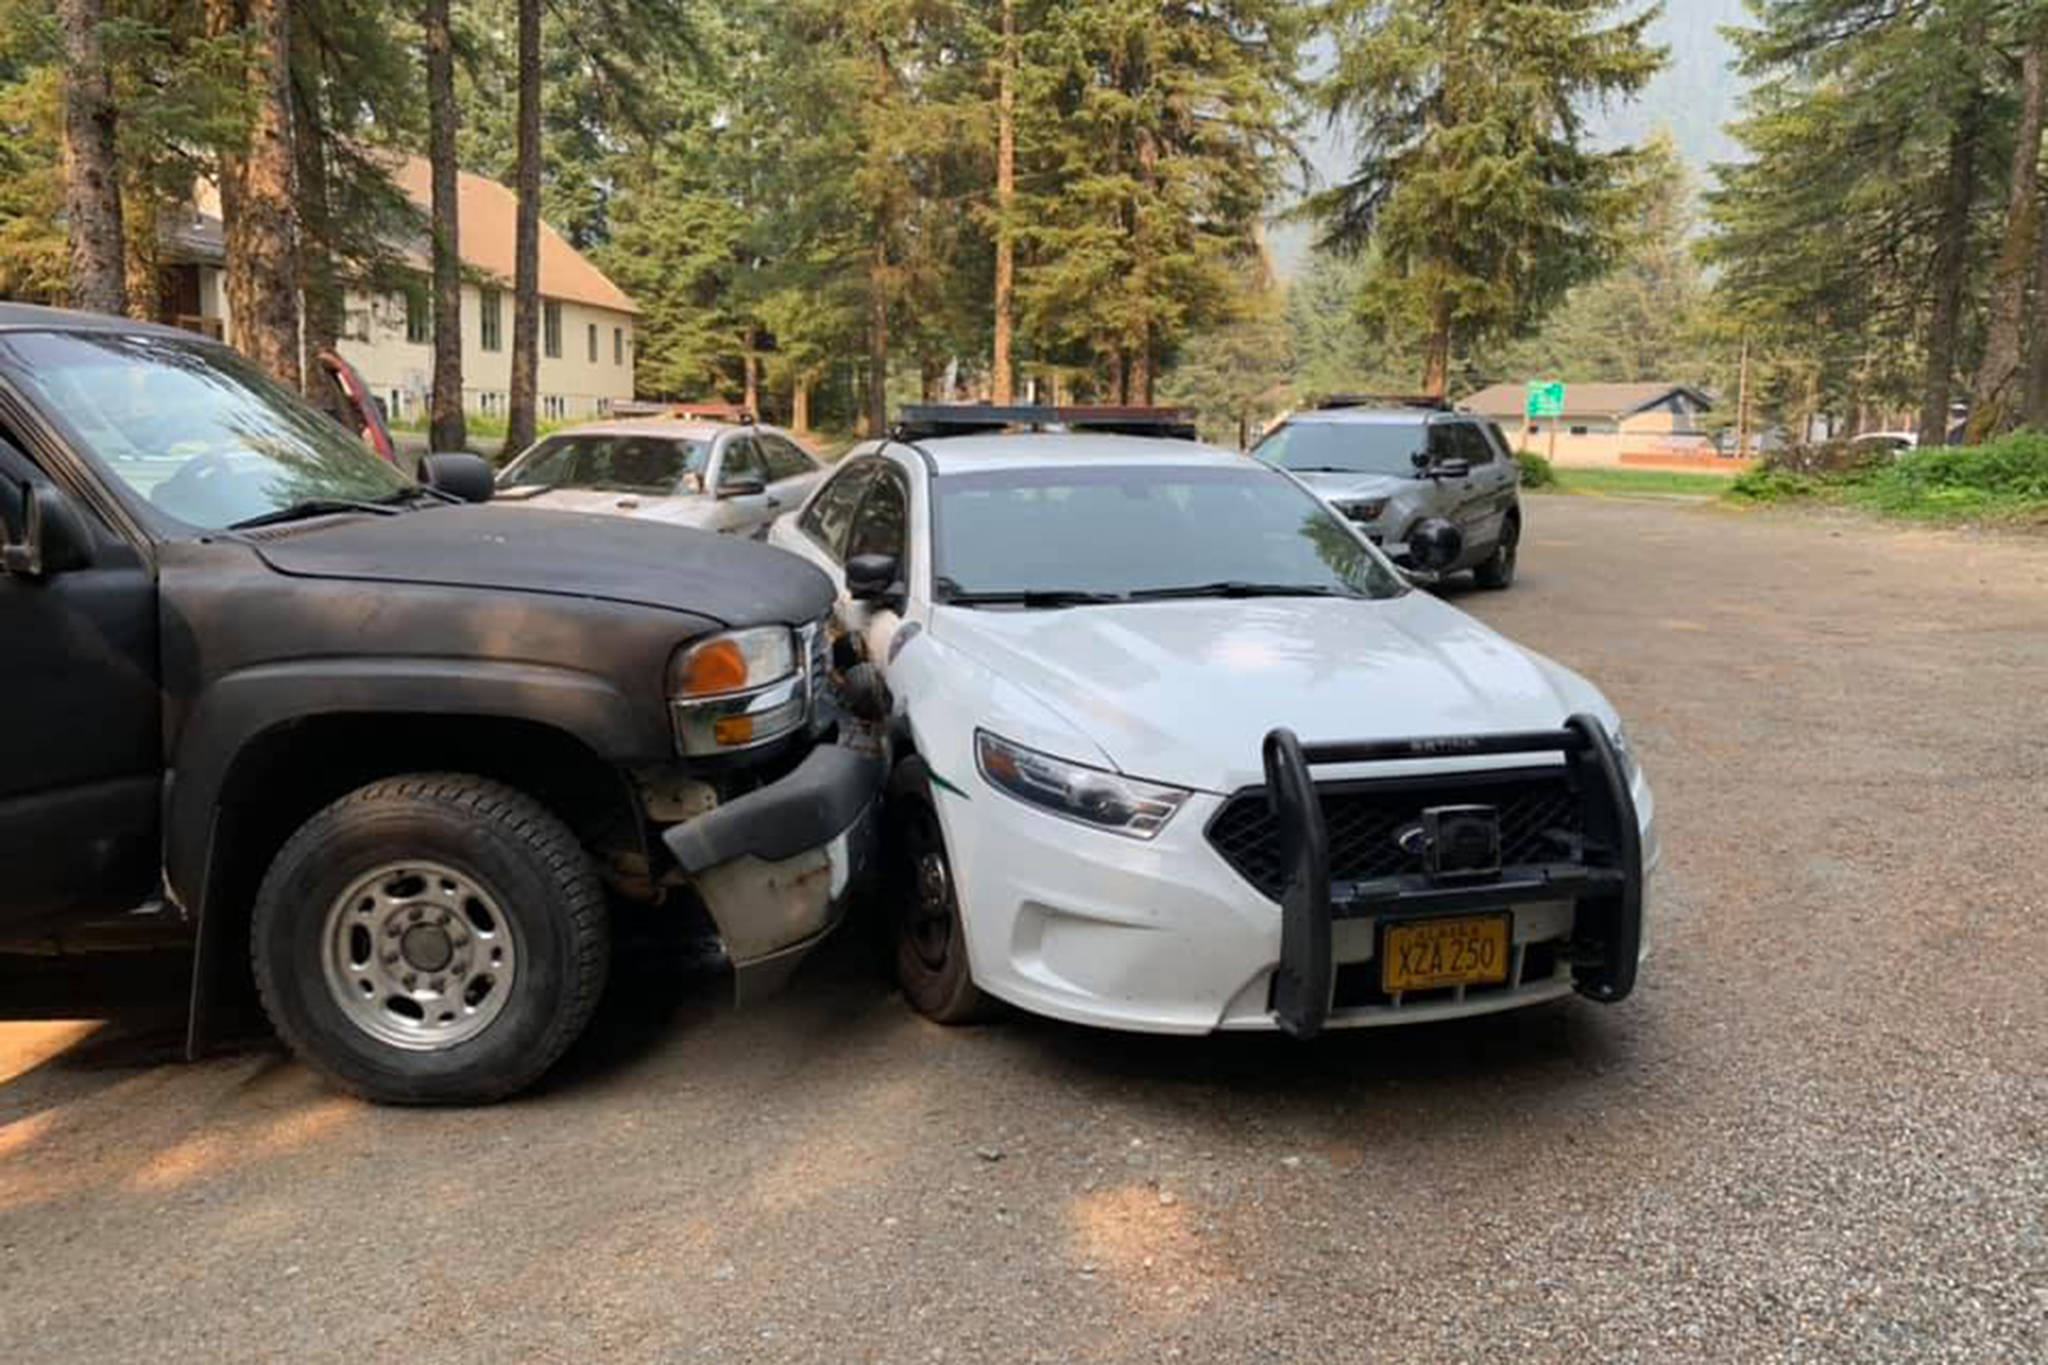 Juneau police released this image of a car crash from Sunday, July 7, 2019. (Courtesy photo | Juneau Police Department)